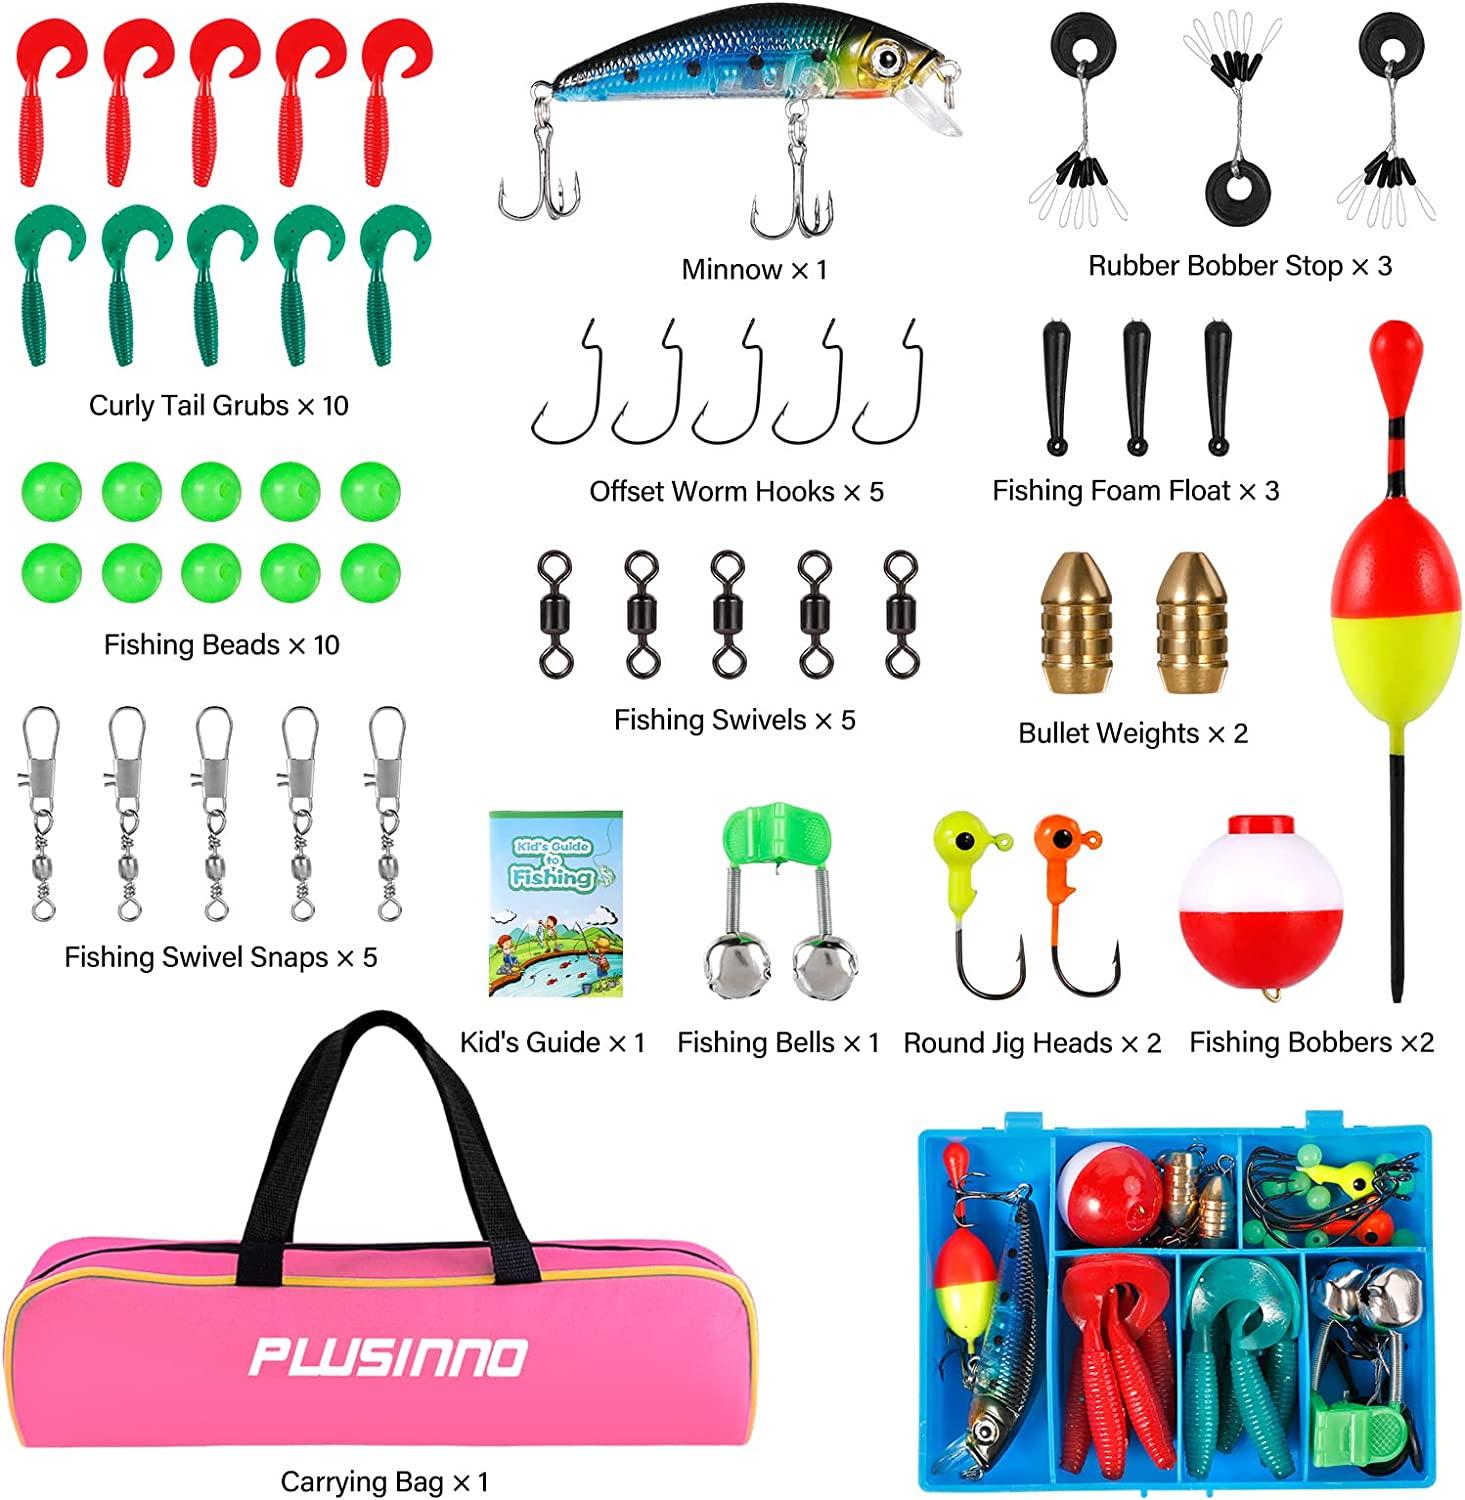 PLUSINNO Kids Fishing Pole,Portable Telescopic Fishing Rod and Reel Full Kits, Spincast Fishing Pole for Kids, Boy, Youth (Orange Handle with Bag